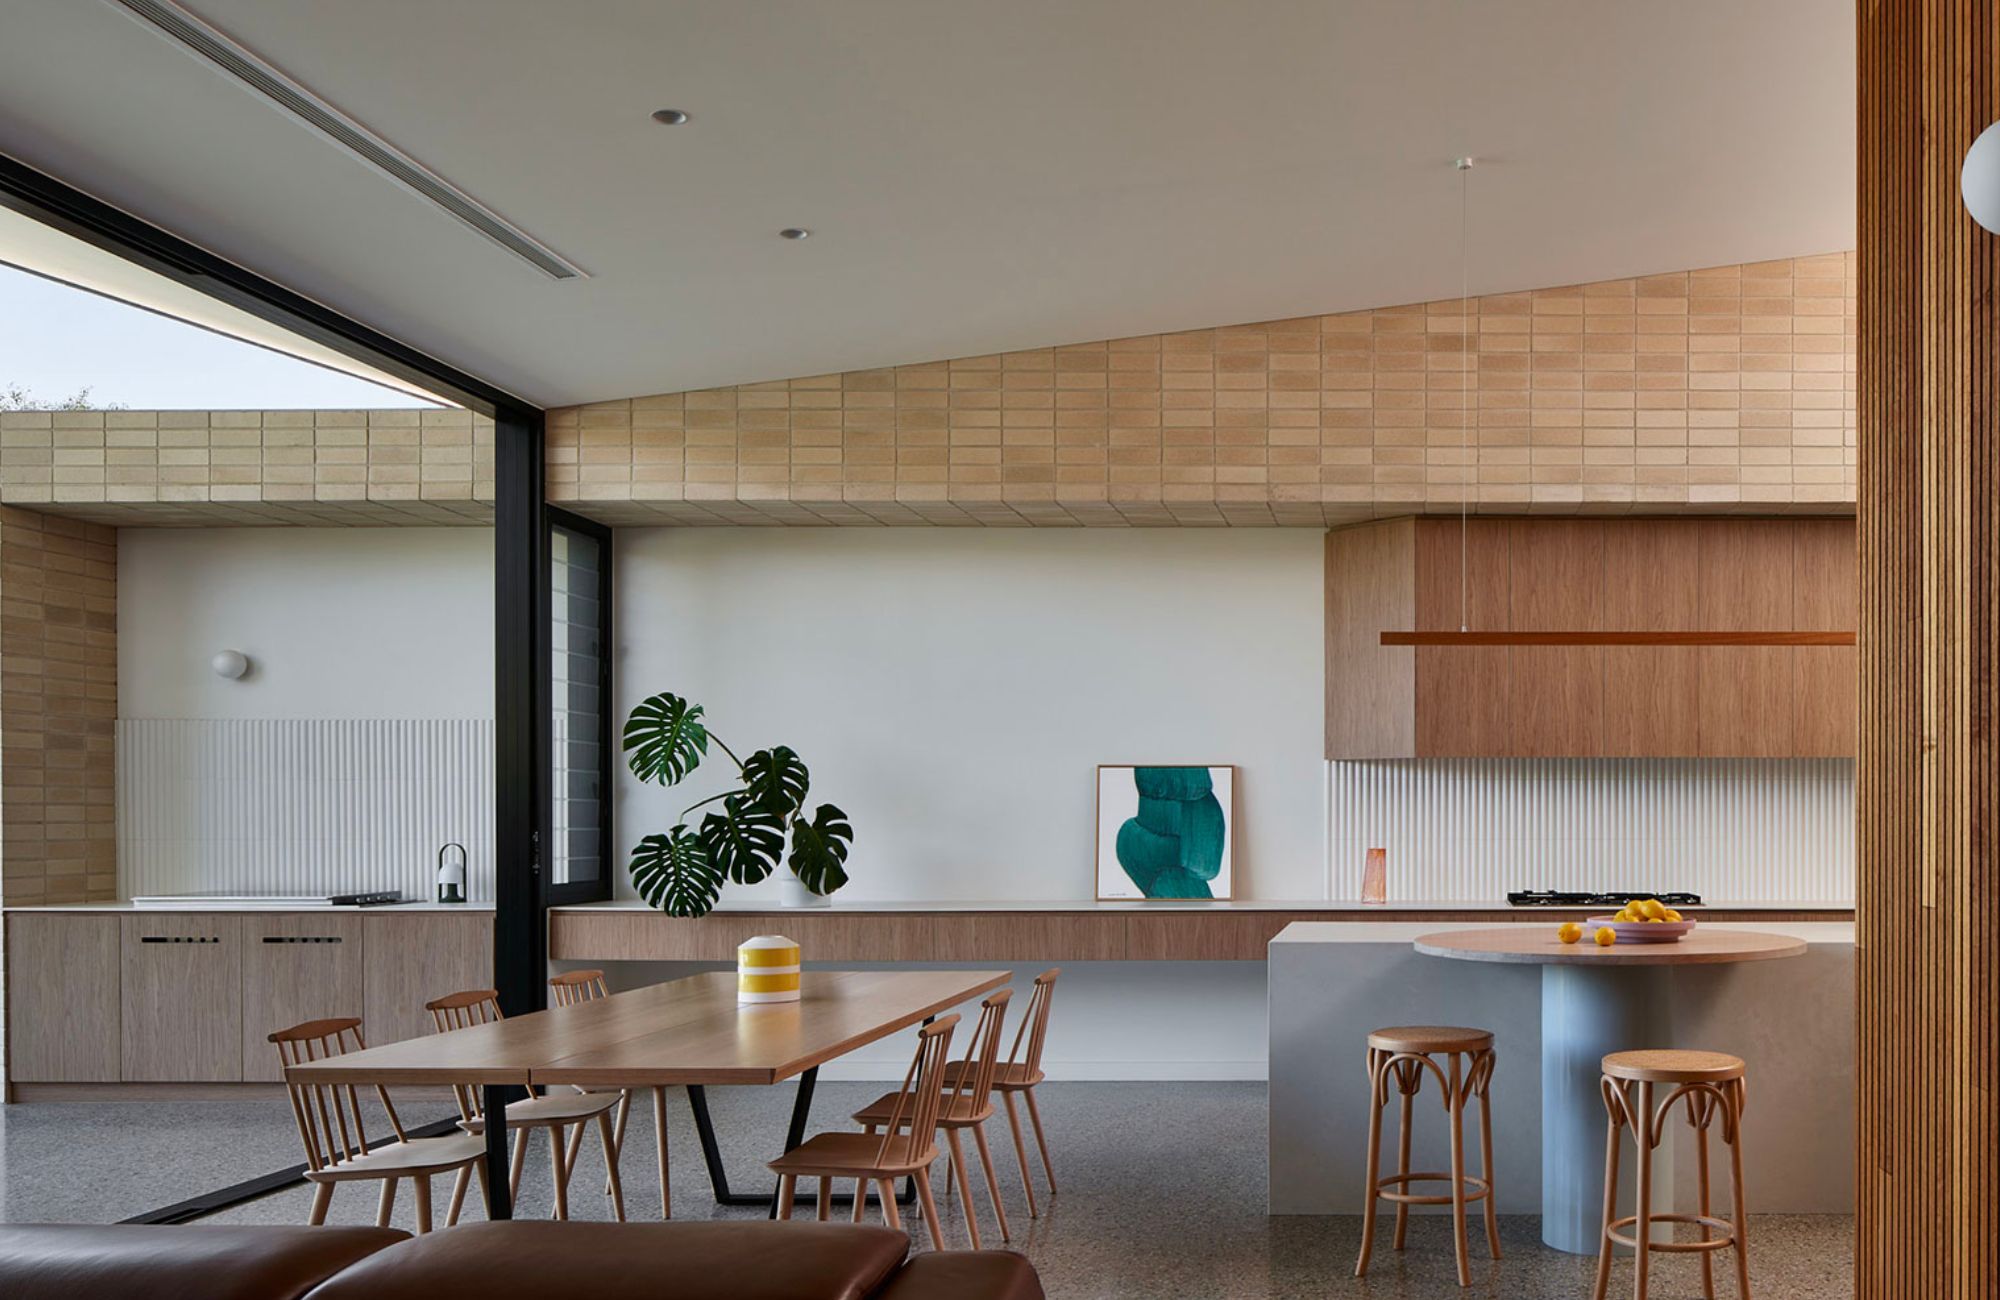 Swoosh House by Das Studio showing interior of kitchen and dining space